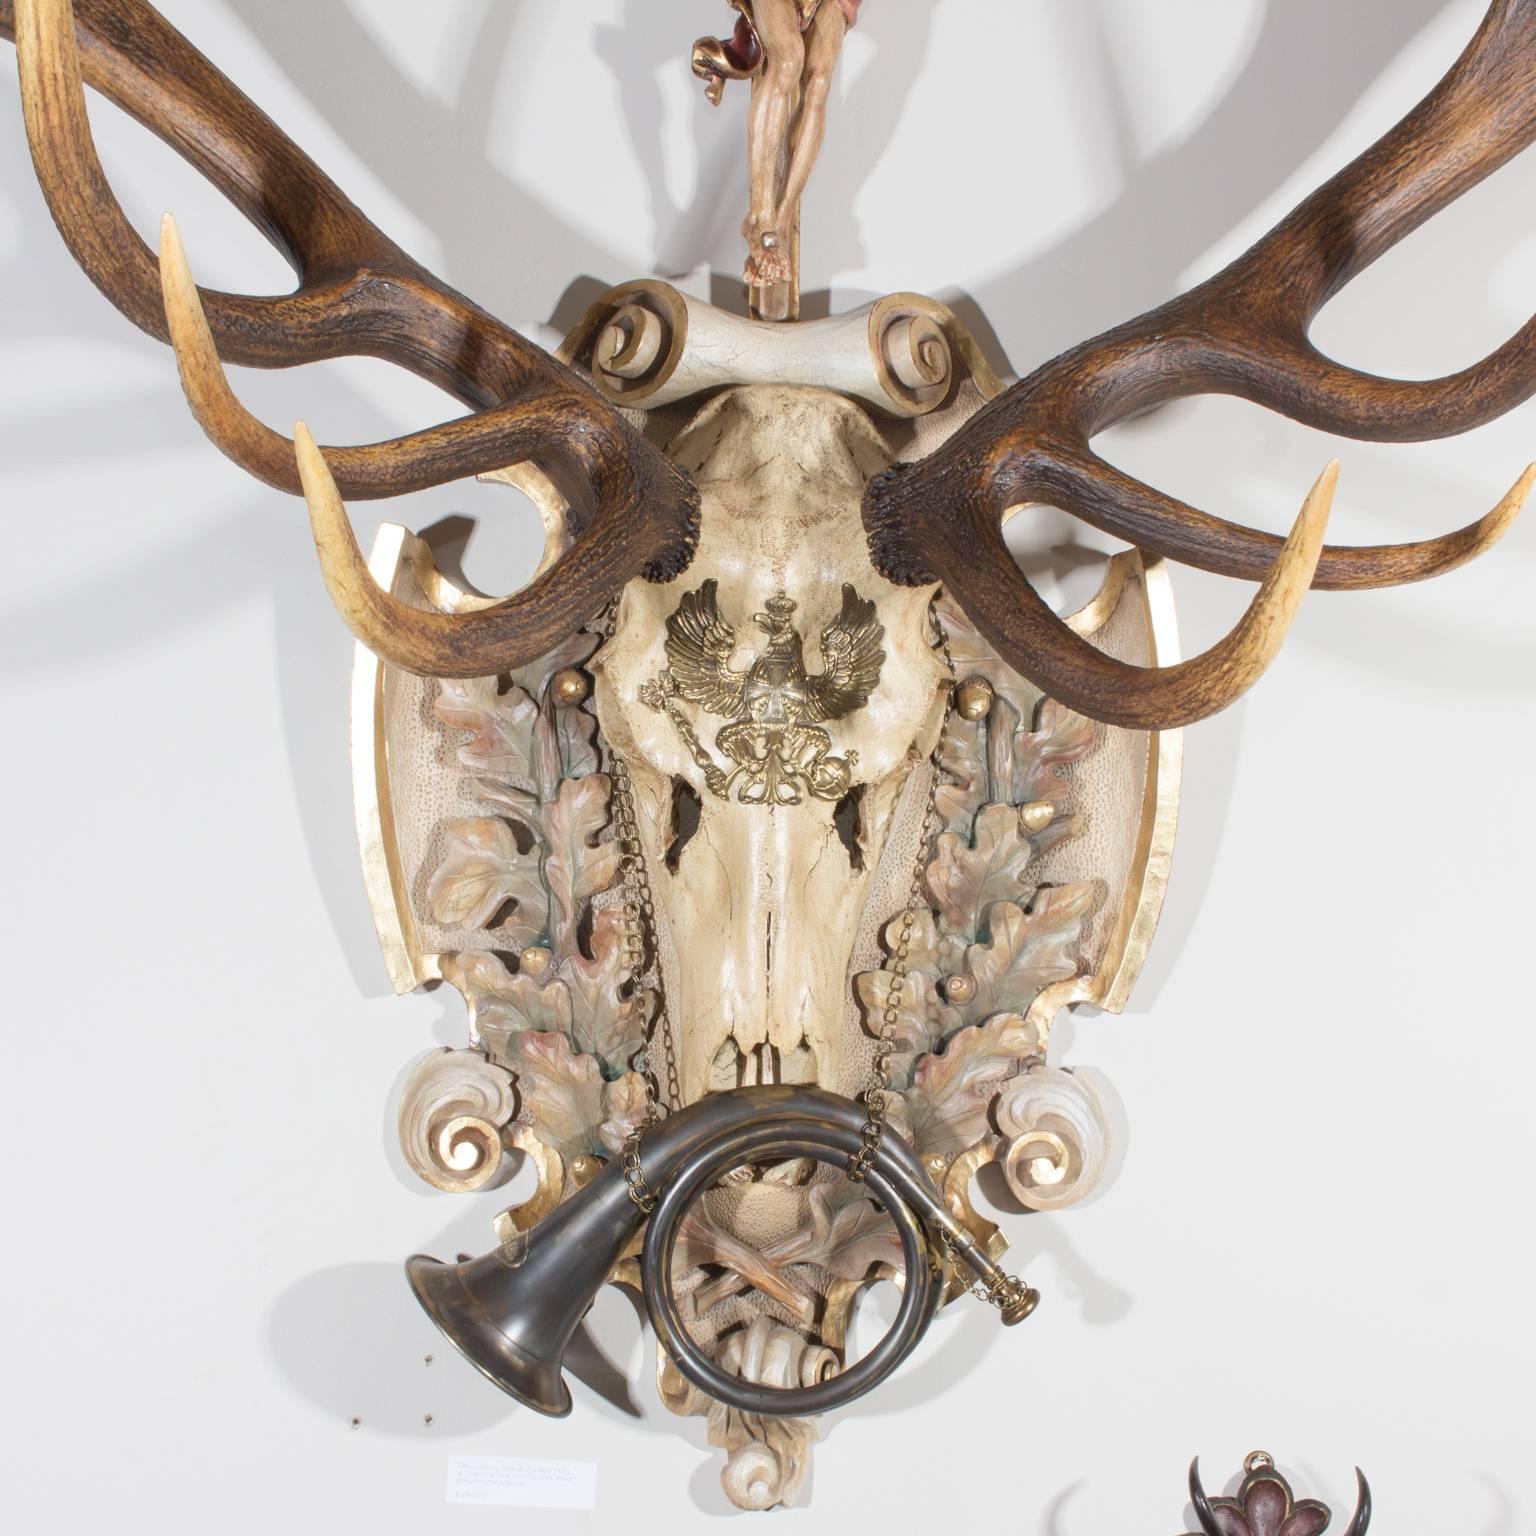 Truly an exceptional piece in the collection, this magnificent 19th century St. Hubertus Red Stag hunting trophy originated from the Eckartsau castle of Emperor Franz Joseph in the Southern Austrian Alps.

Eckartsau was a favorite hunting Schloss